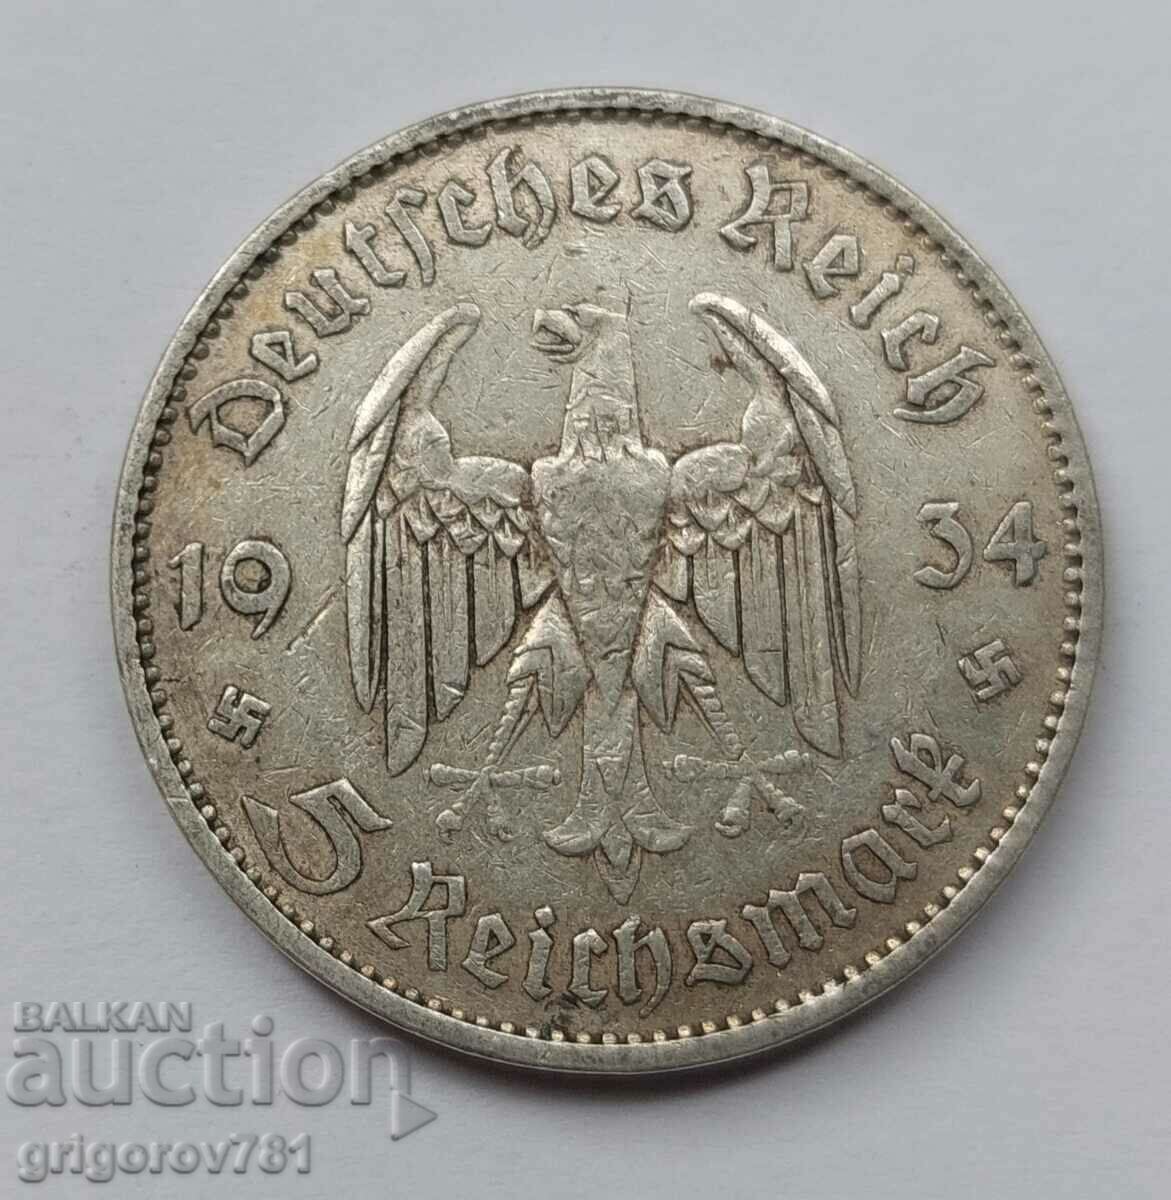 5 Mark Silver Germany 1934 A III Reich Silver Coin #7